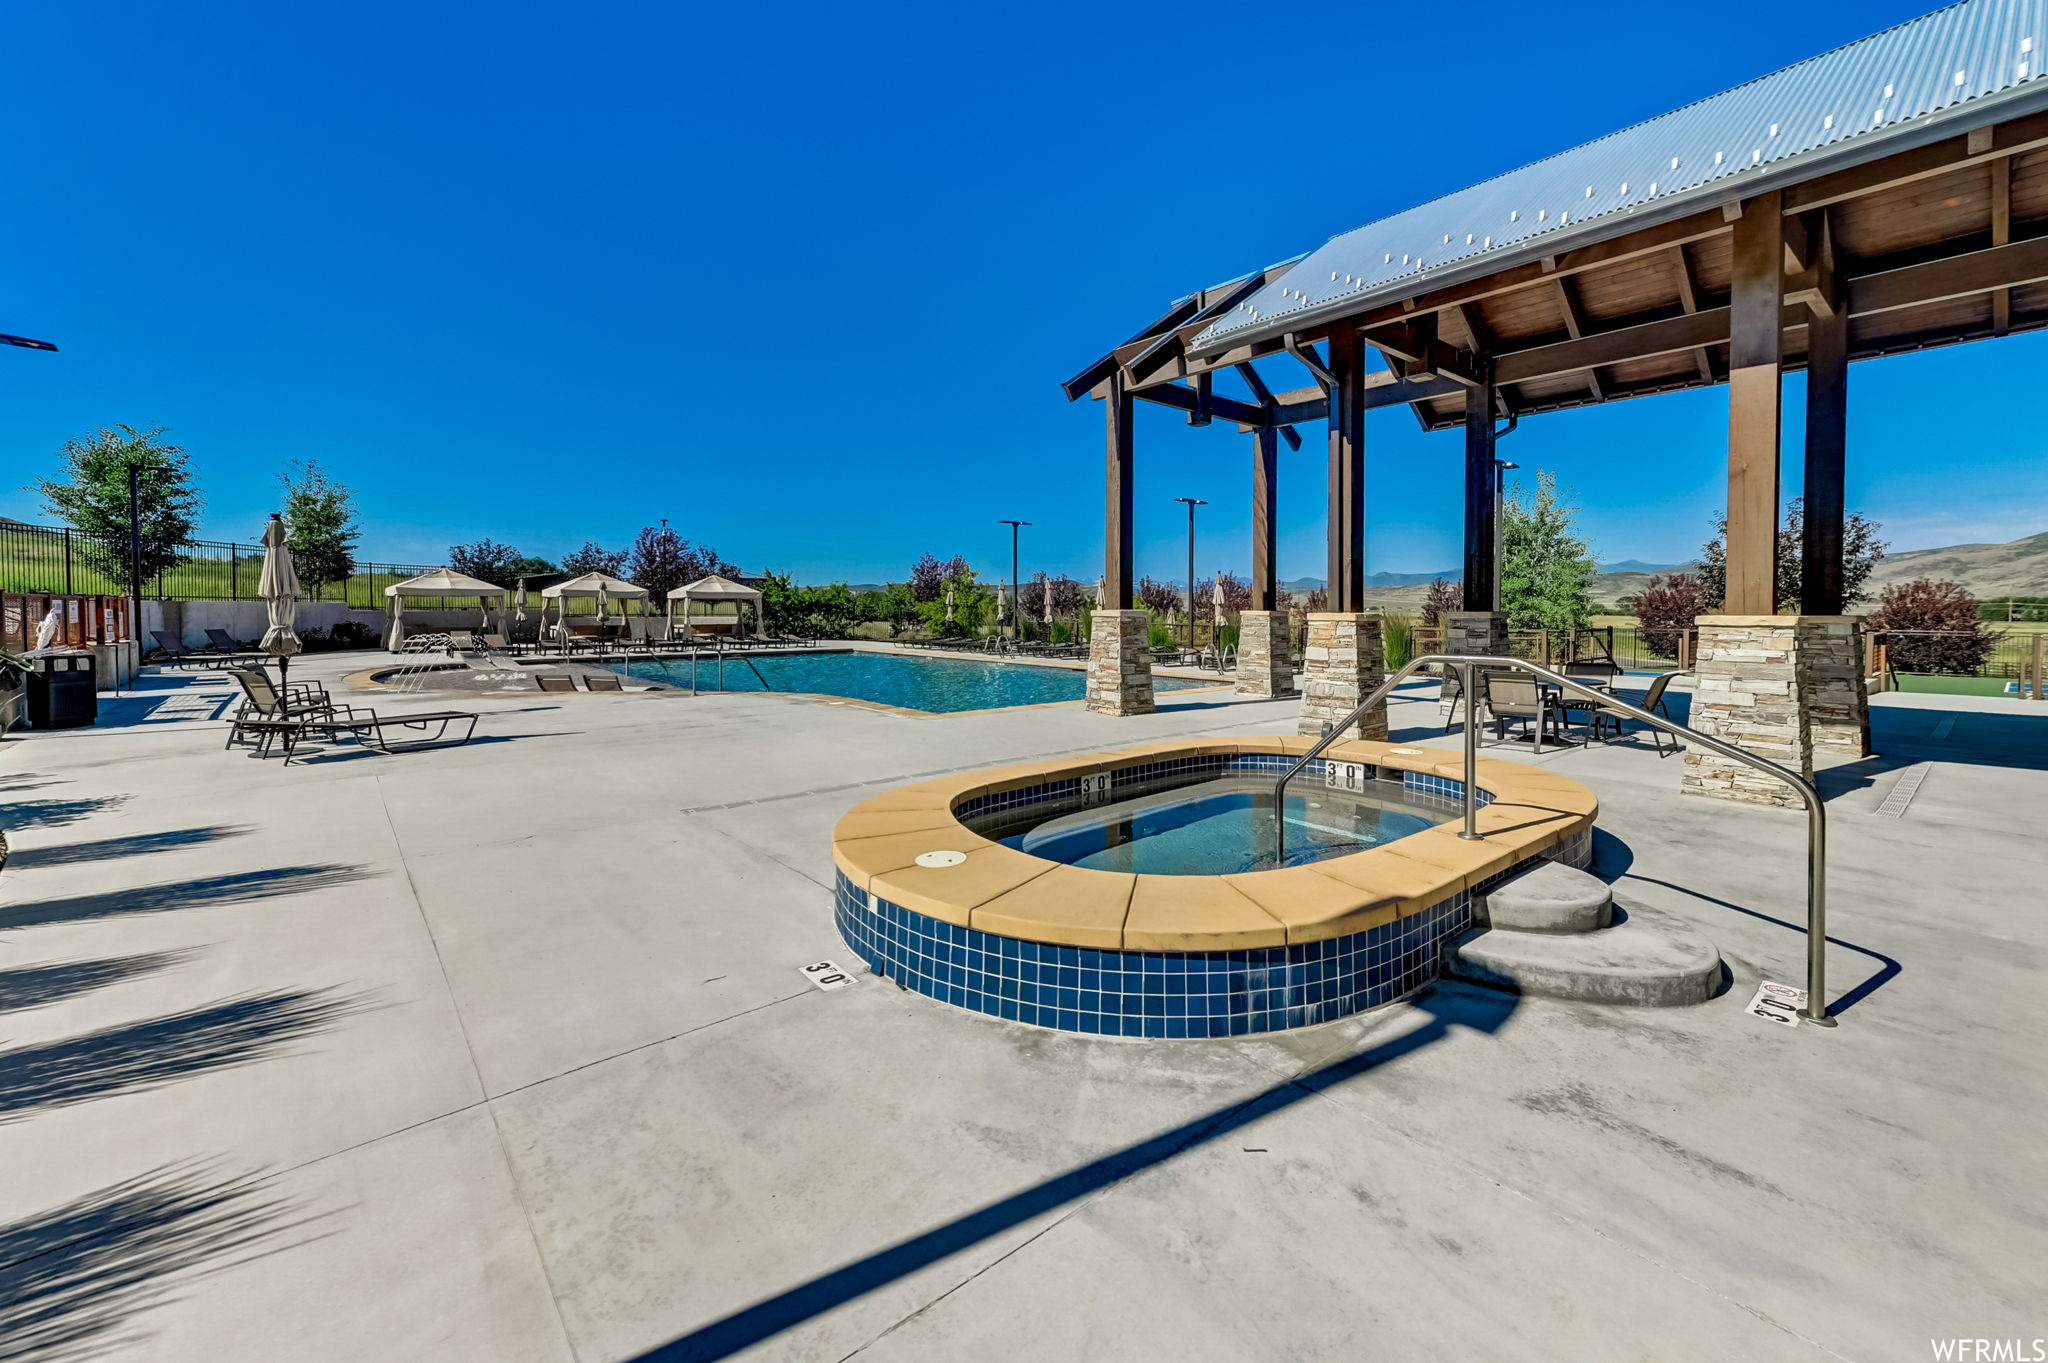 View of swimming pool with a community hot tub and a patio area